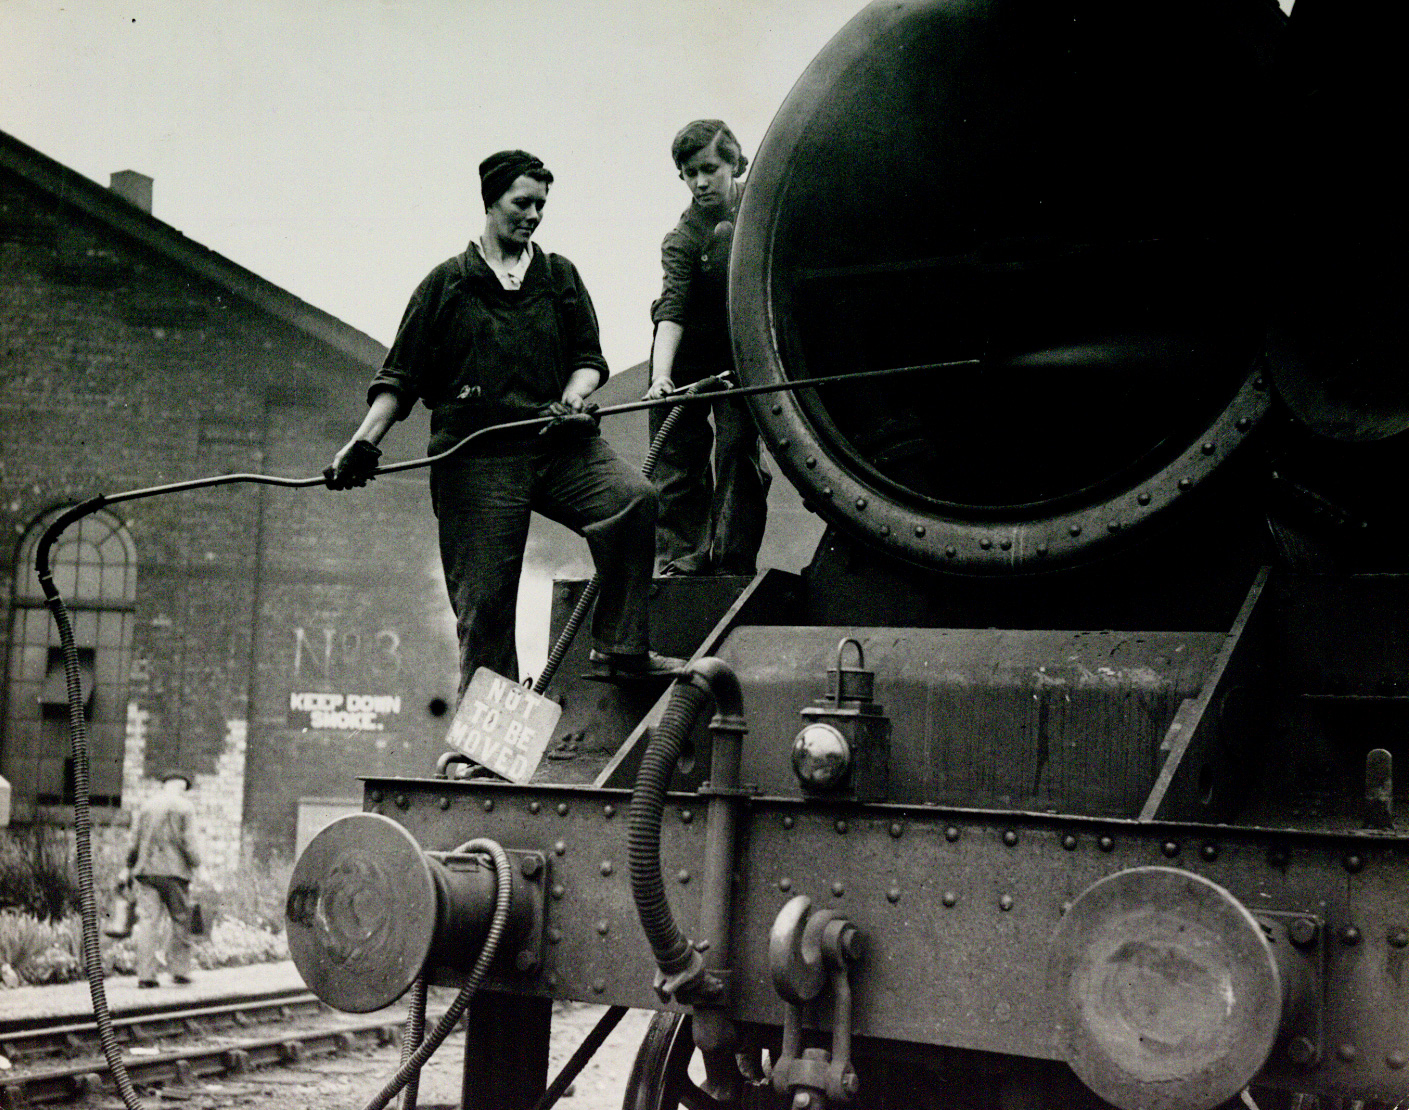 Monochrome photograph of two women standing on the wront of a steam locomotive and washing it with a pressure washer.